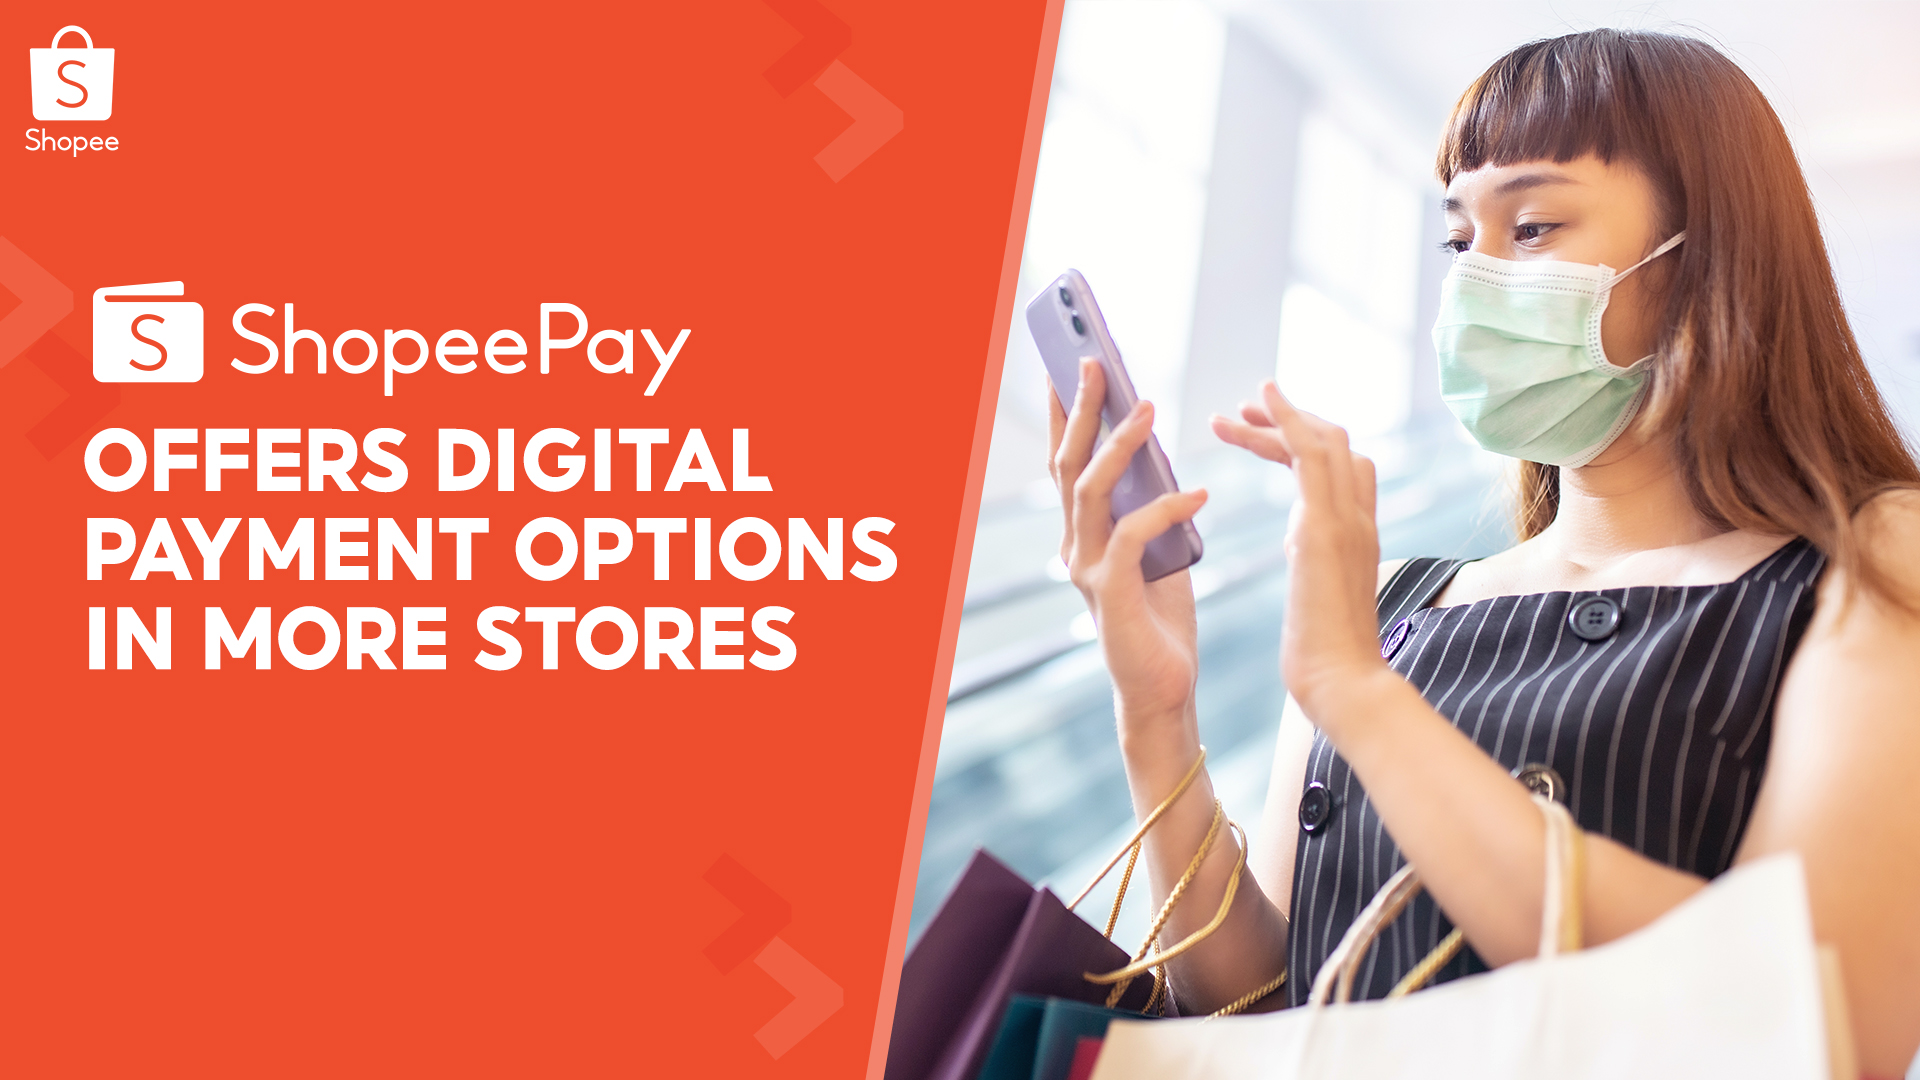 ShopeePay Expands Presence with Lifestyle and Food Brands as More Filipinos Embrace Mobile Wallets